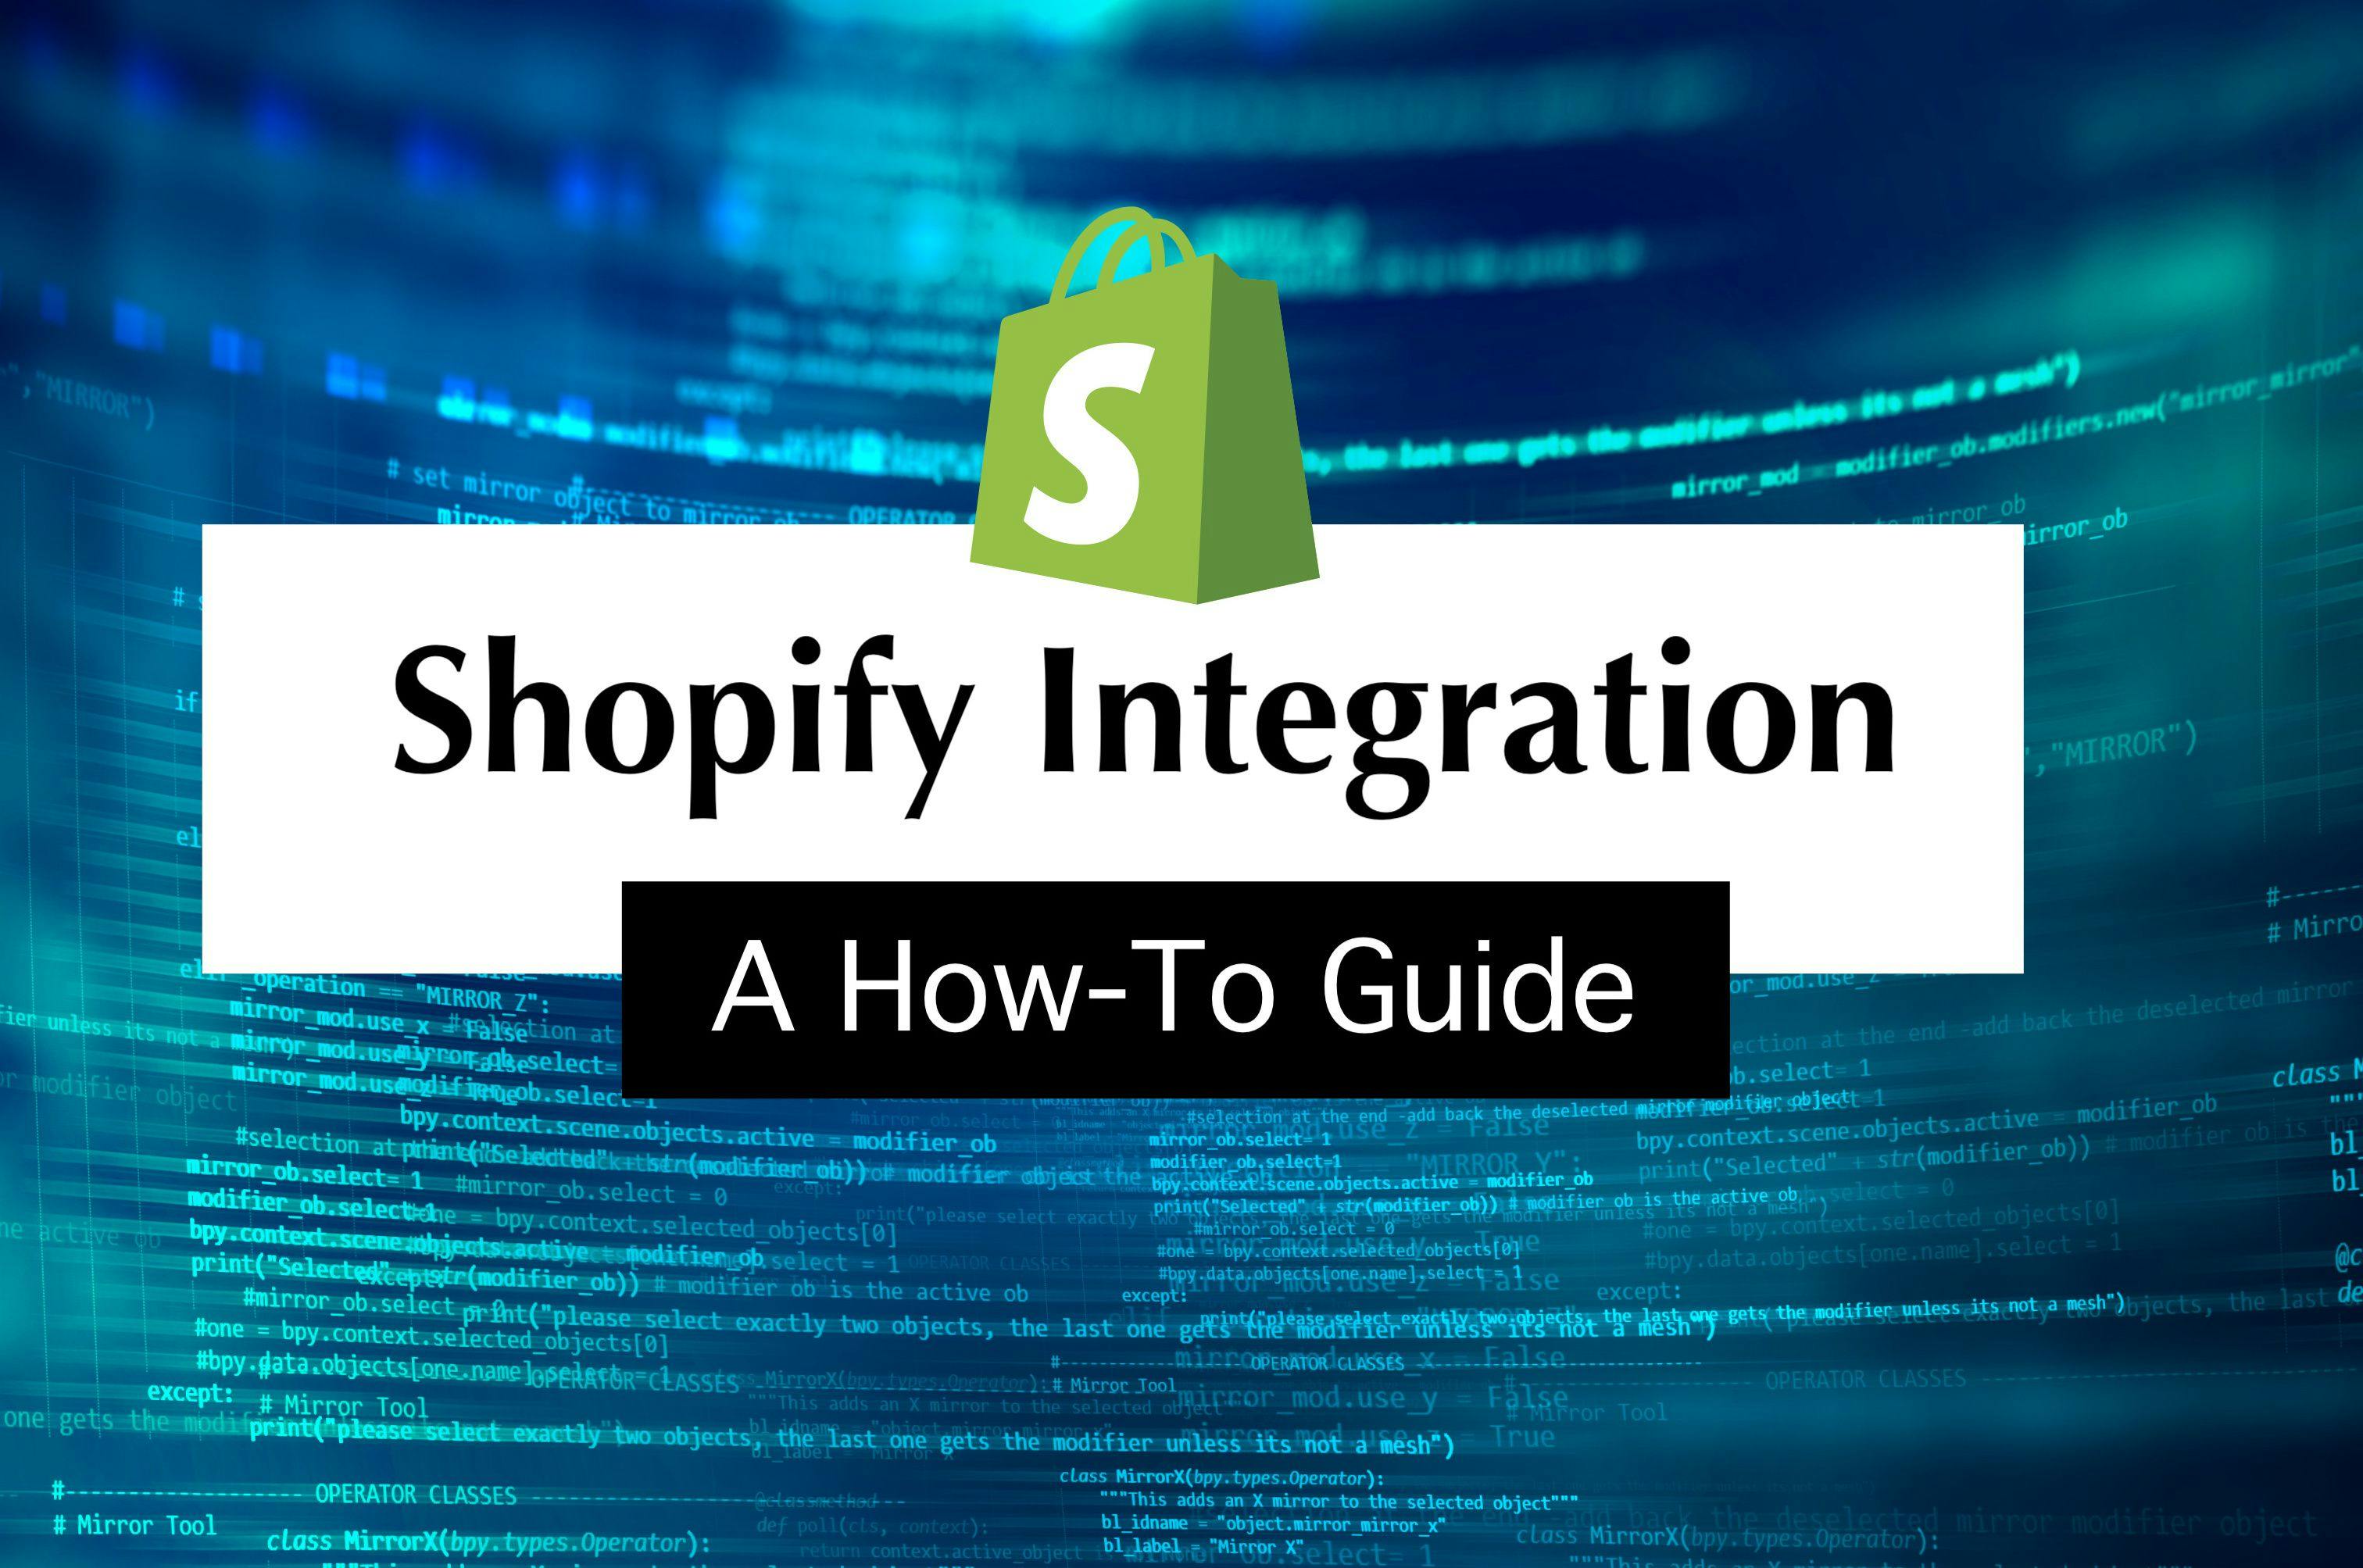 /how-to-build-a-shopify-integration-tm4k33x6 feature image